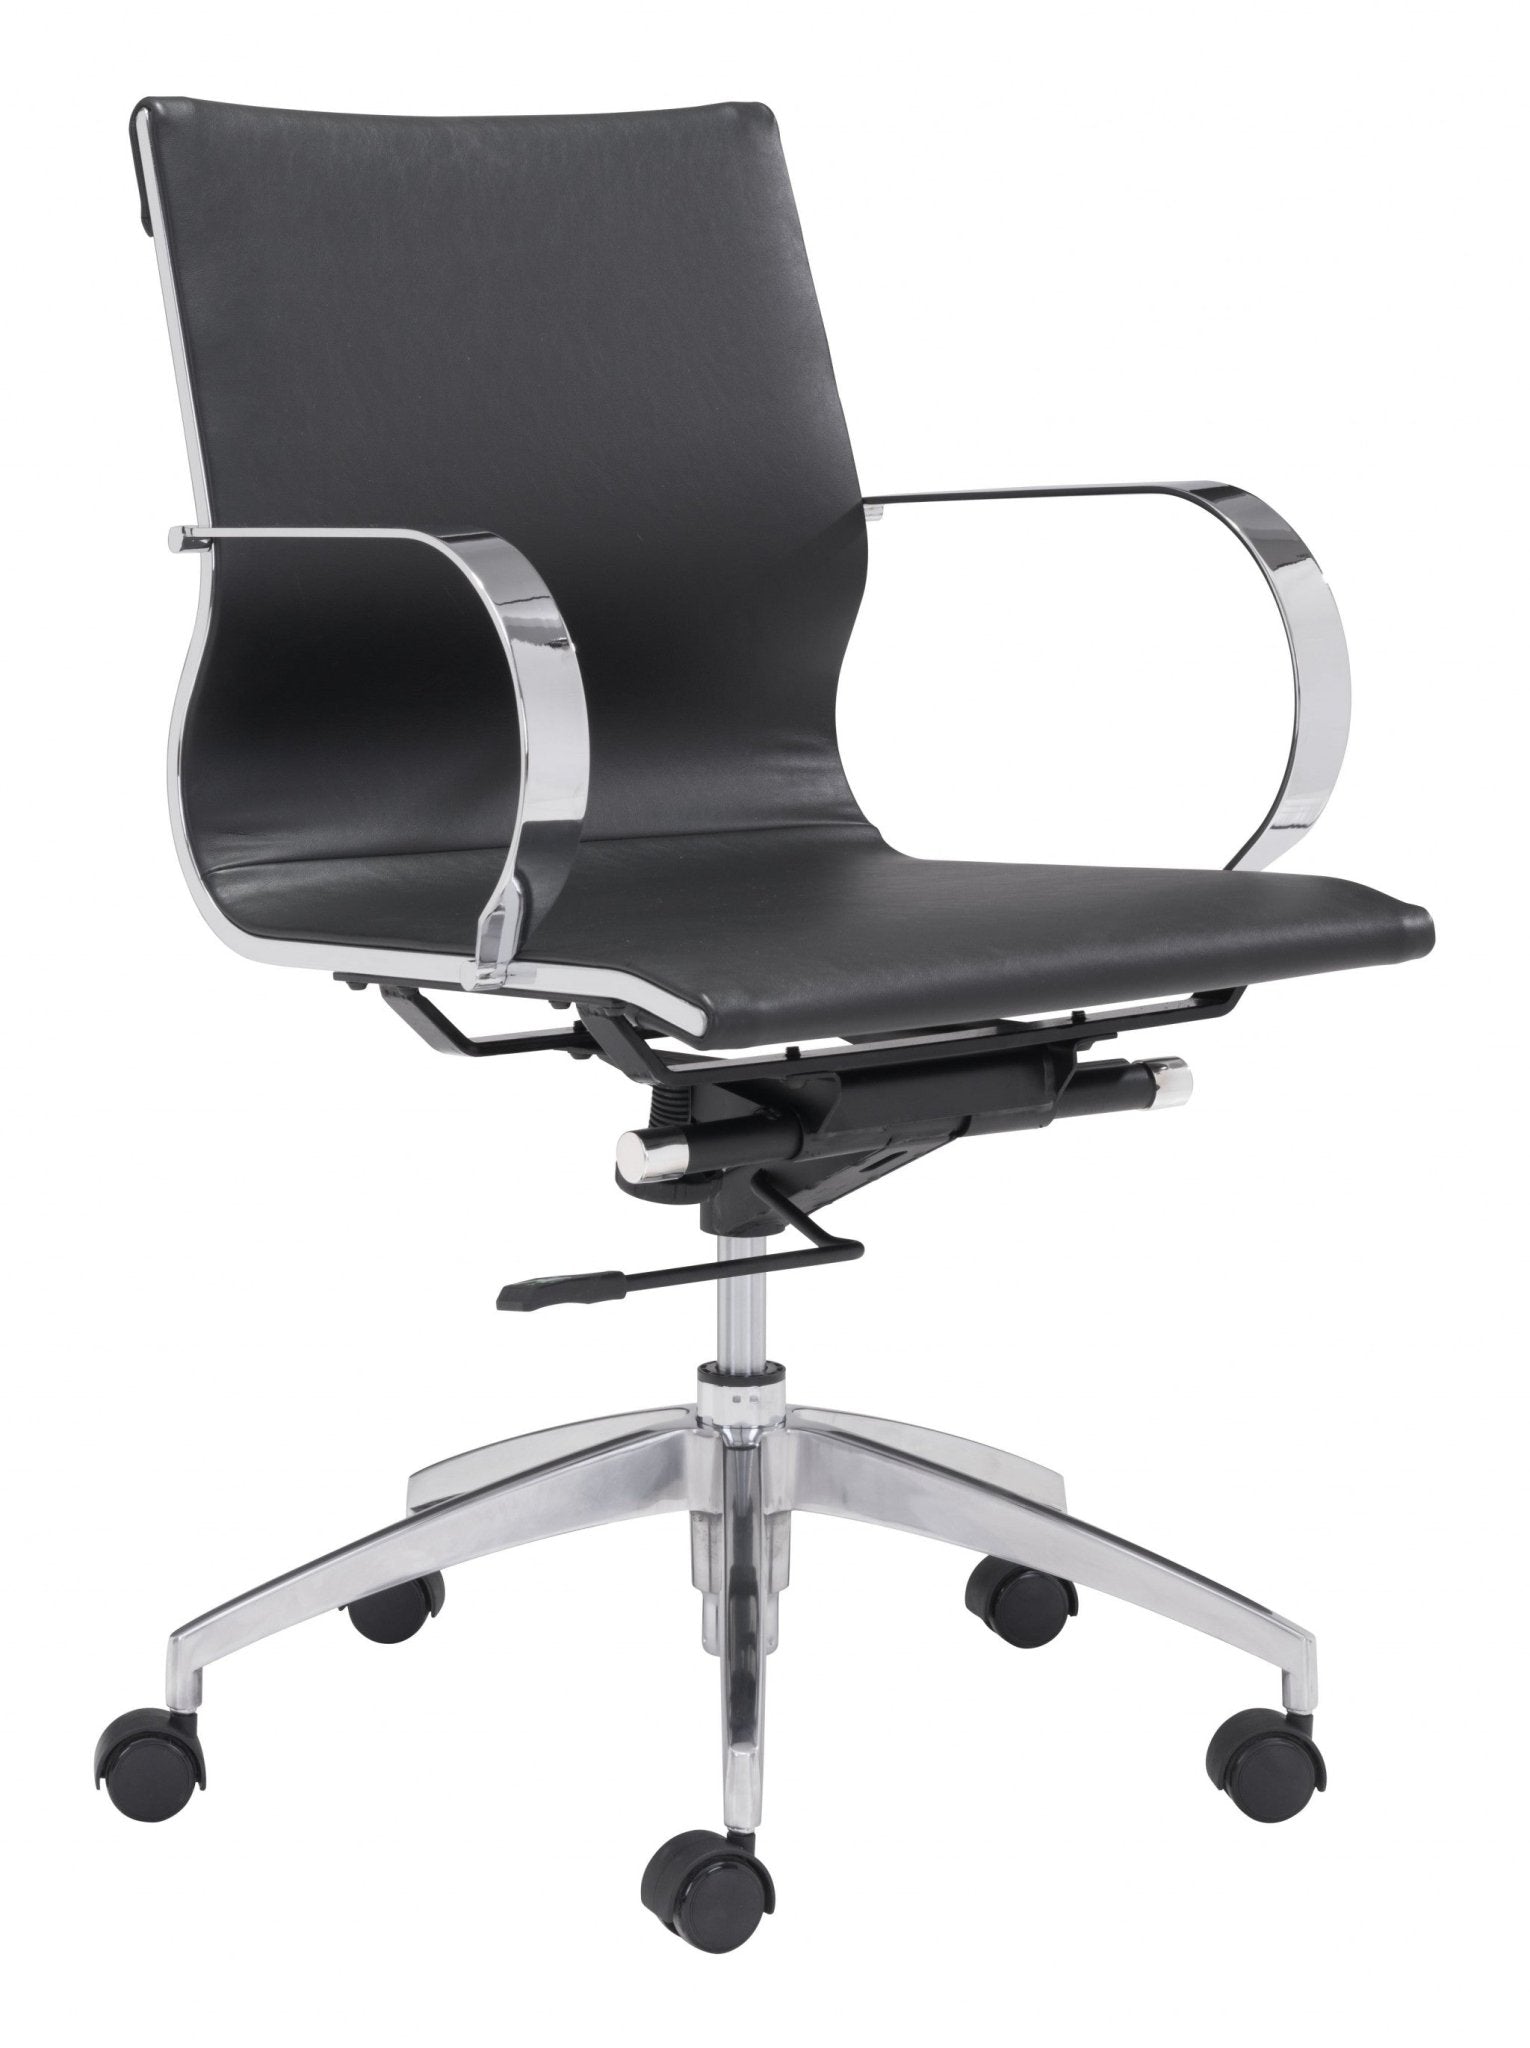 Black-Faux-Leather-Seat-Swivel-Adjustable-Conference-Chair-Metal-Back-Steel-Frame-Office-Chairs